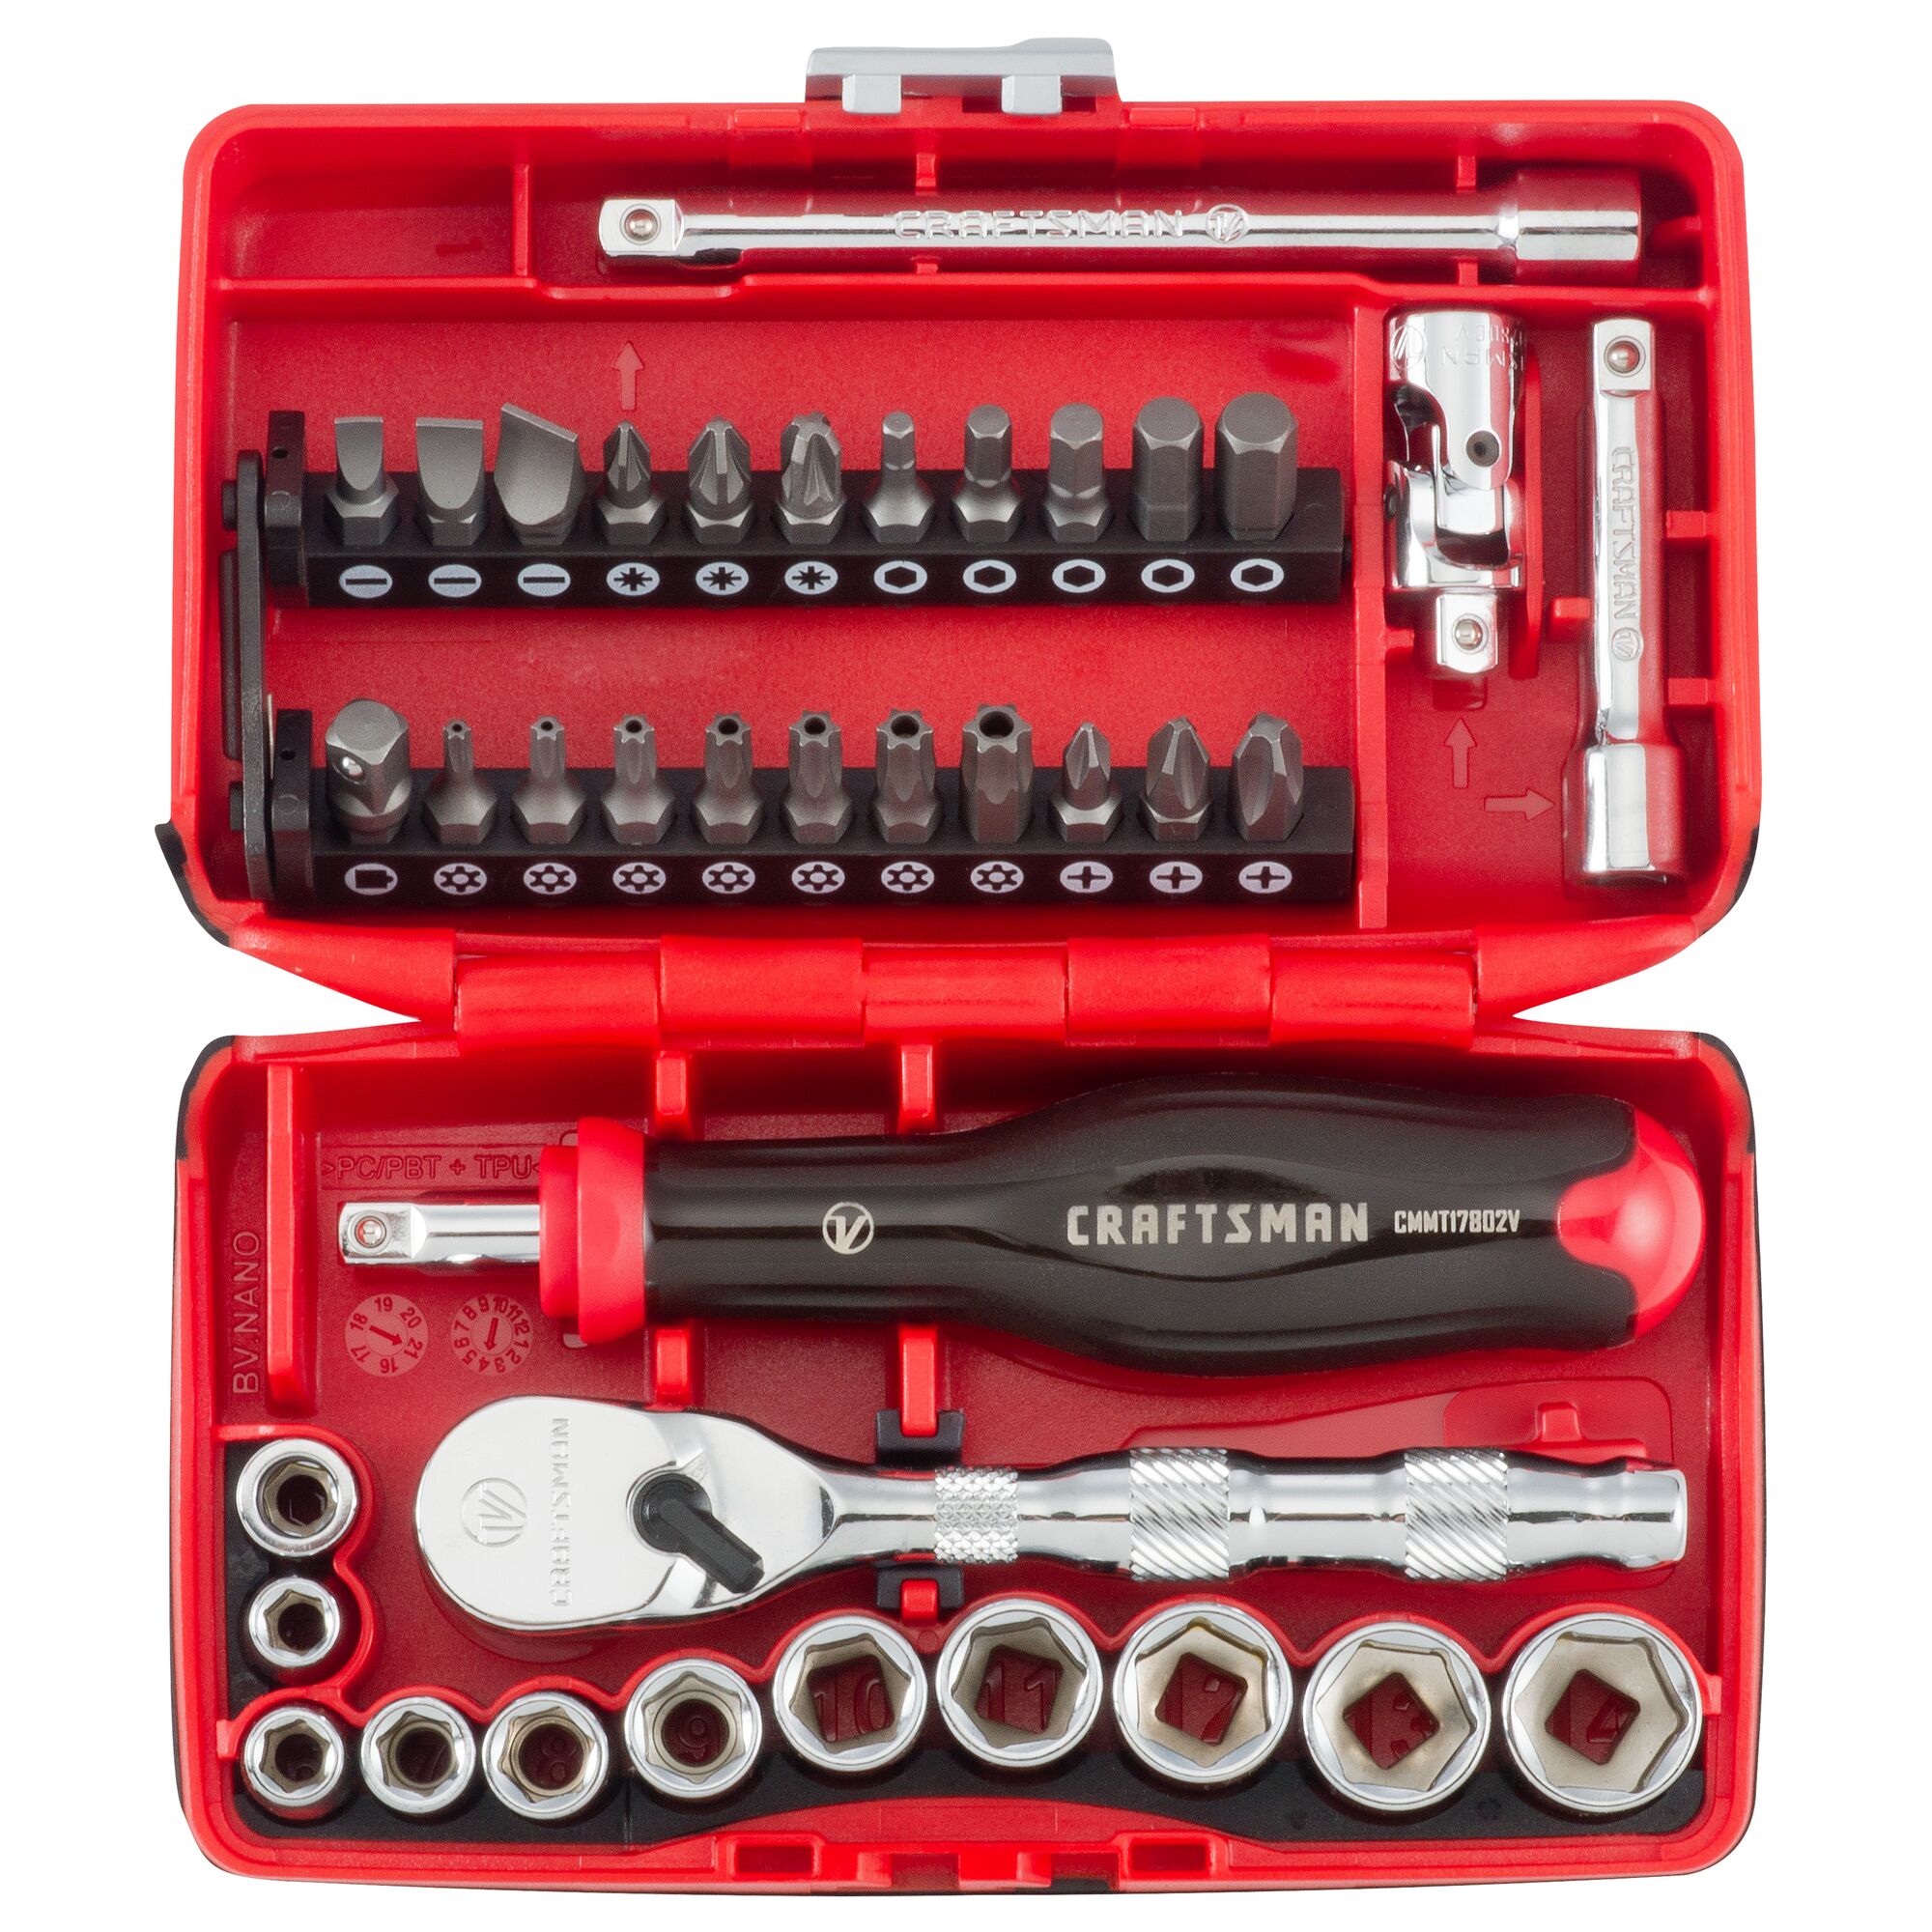 1 quarter inch drive metric 6 point tool set assembled in its case.